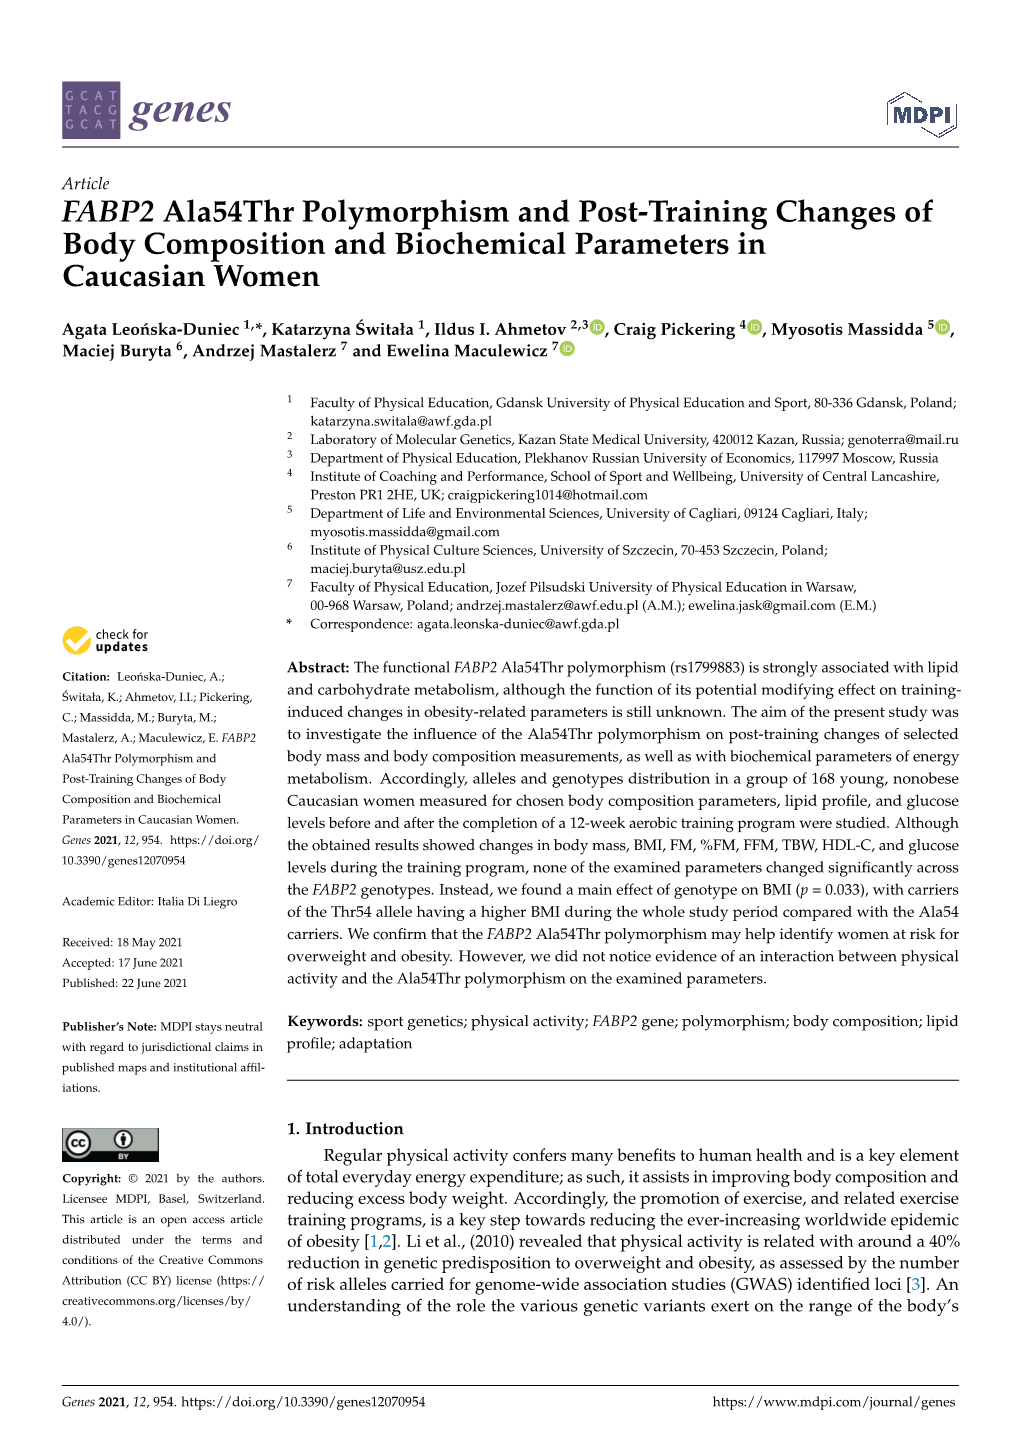 FABP2 Ala54thr Polymorphism and Post-Training Changes of Body Composition and Biochemical Parameters in Caucasian Women